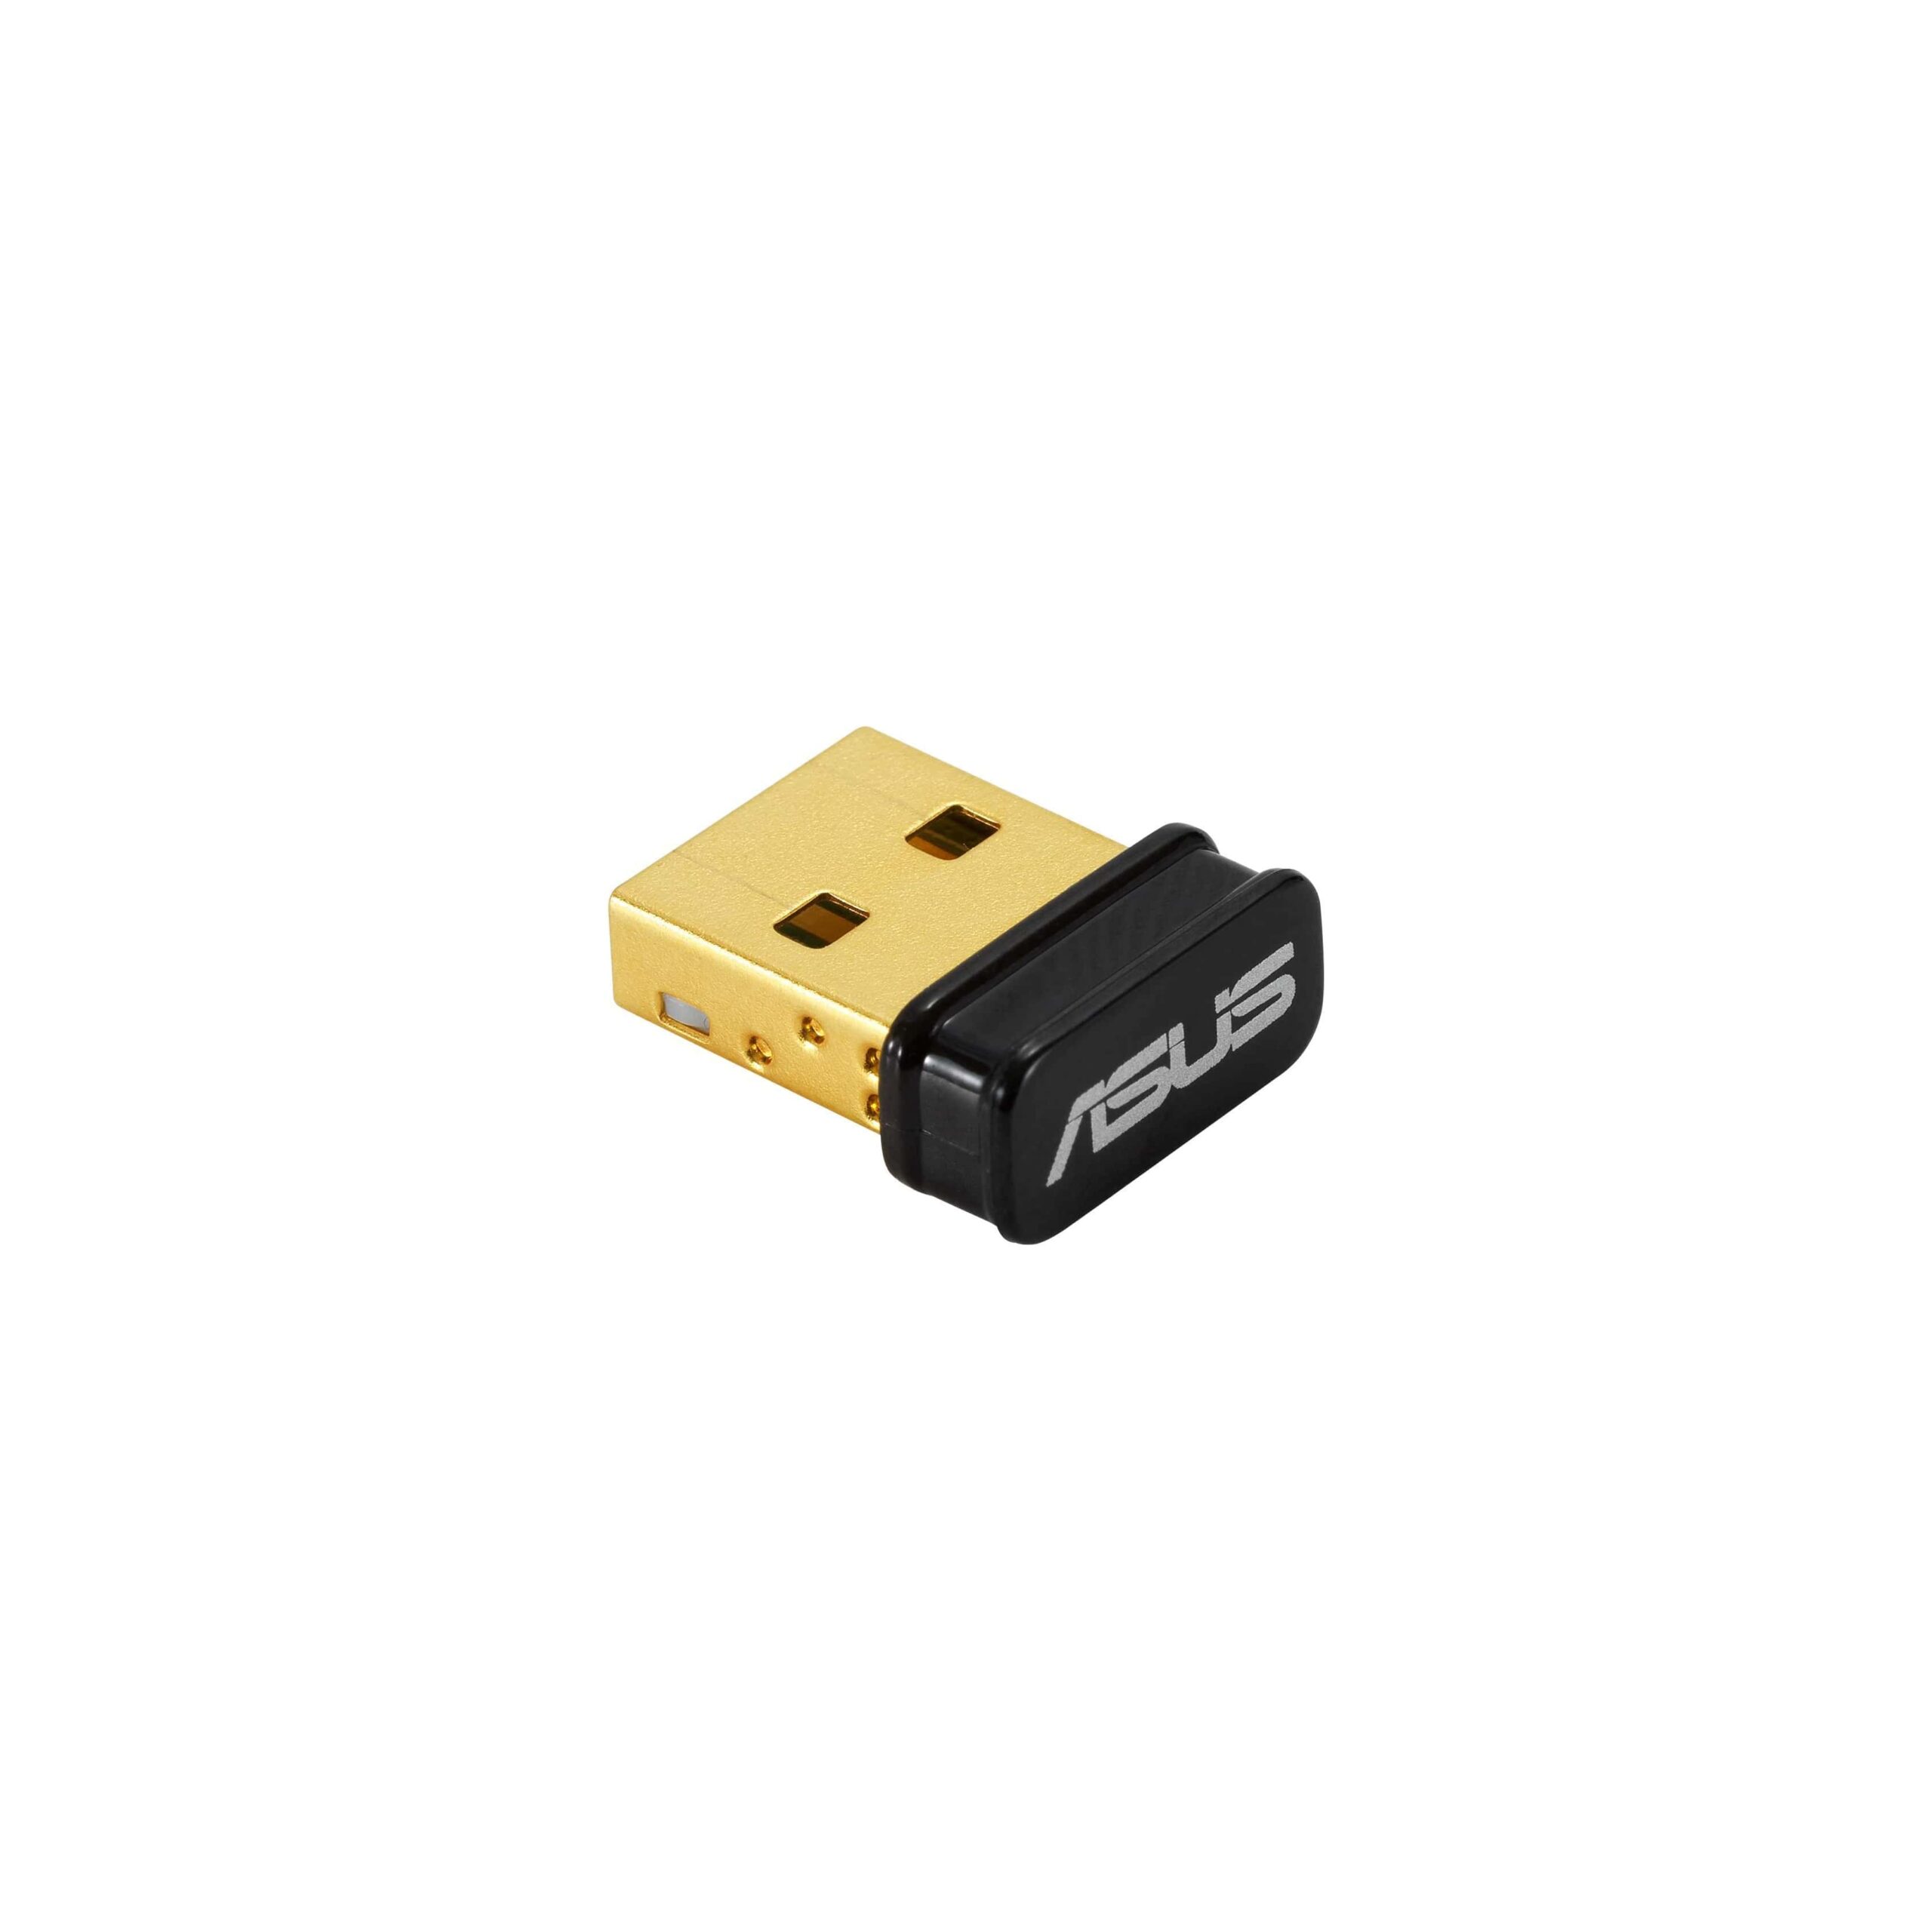 Asus USB-BT500 Bluetooth 5.0 USB Adapter   |  Cables, Adapters & Hubs  |  Bluetooth Adapters  |